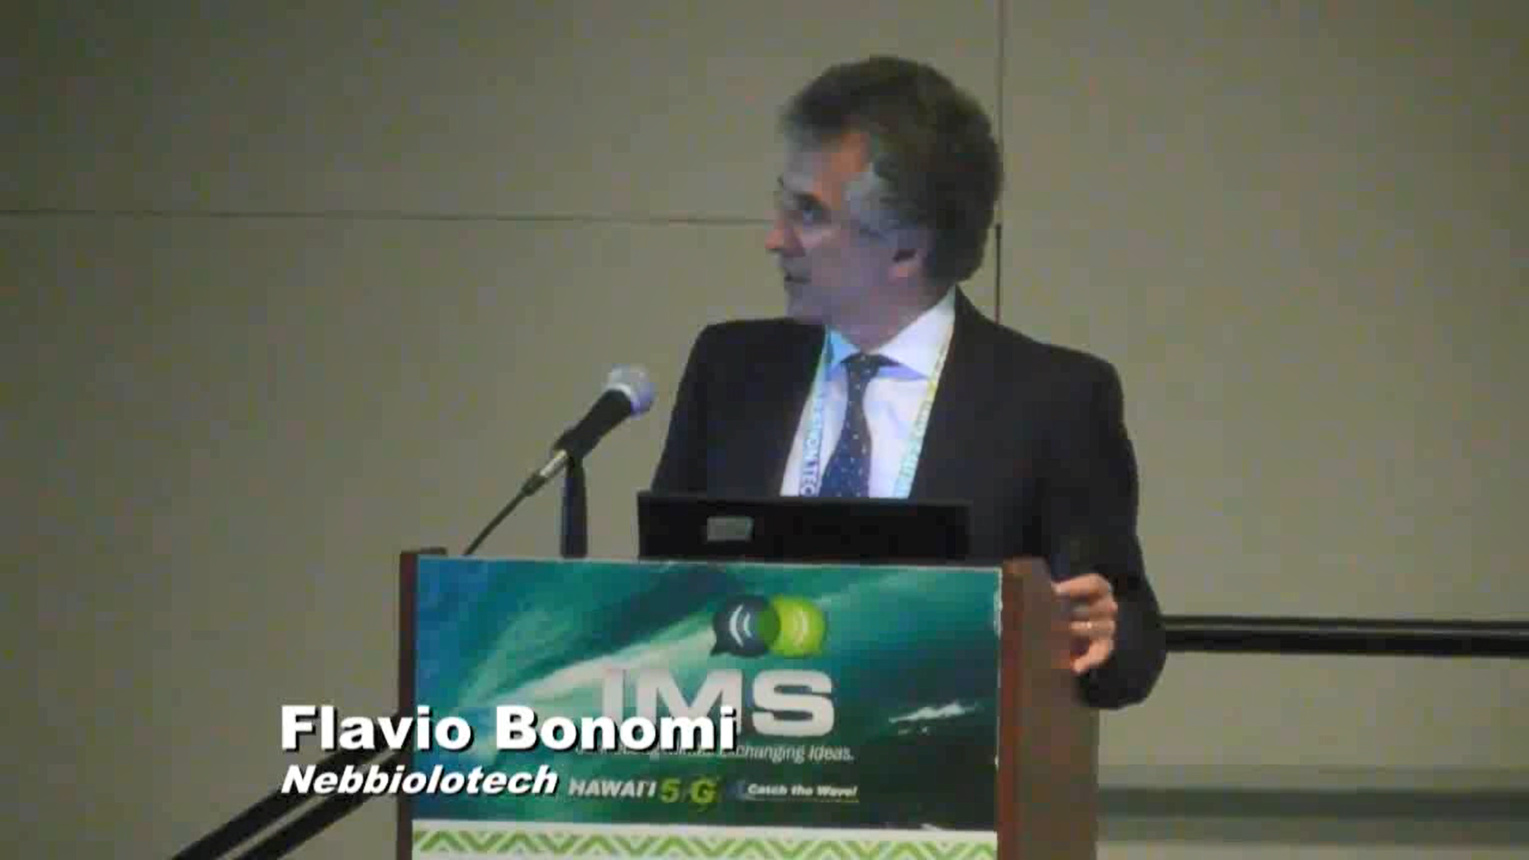 Keynote: Fog Computing, its Applications in Industrial IoT, and its Implications for the Future of 5G - Flavio Bonomi